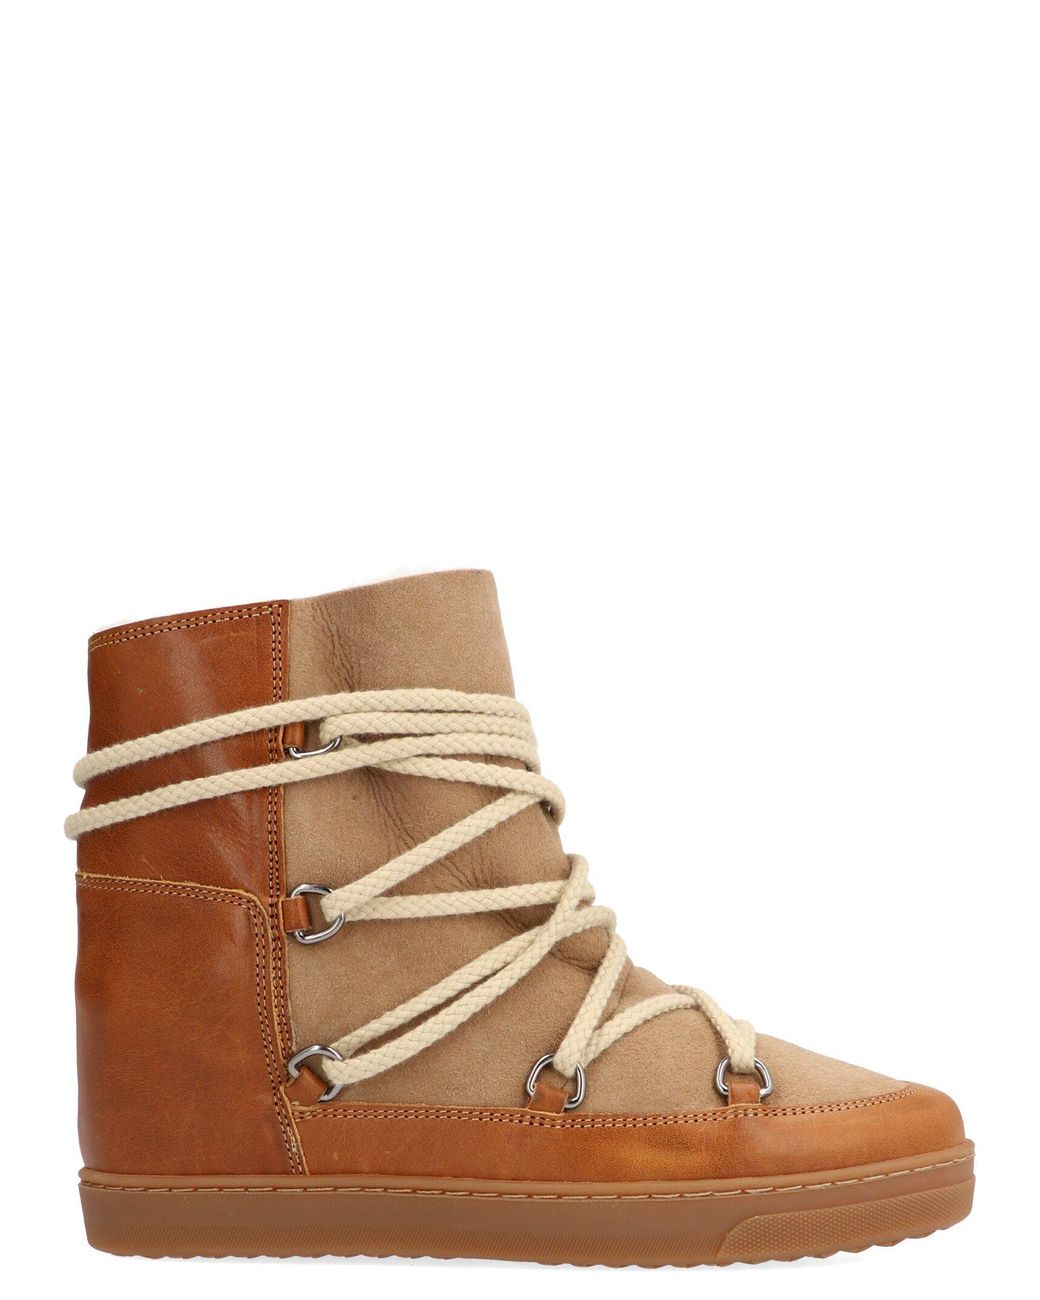 Isabel Marant Leather Nowles Ankle Boots in Beige (Natural) - Lyst